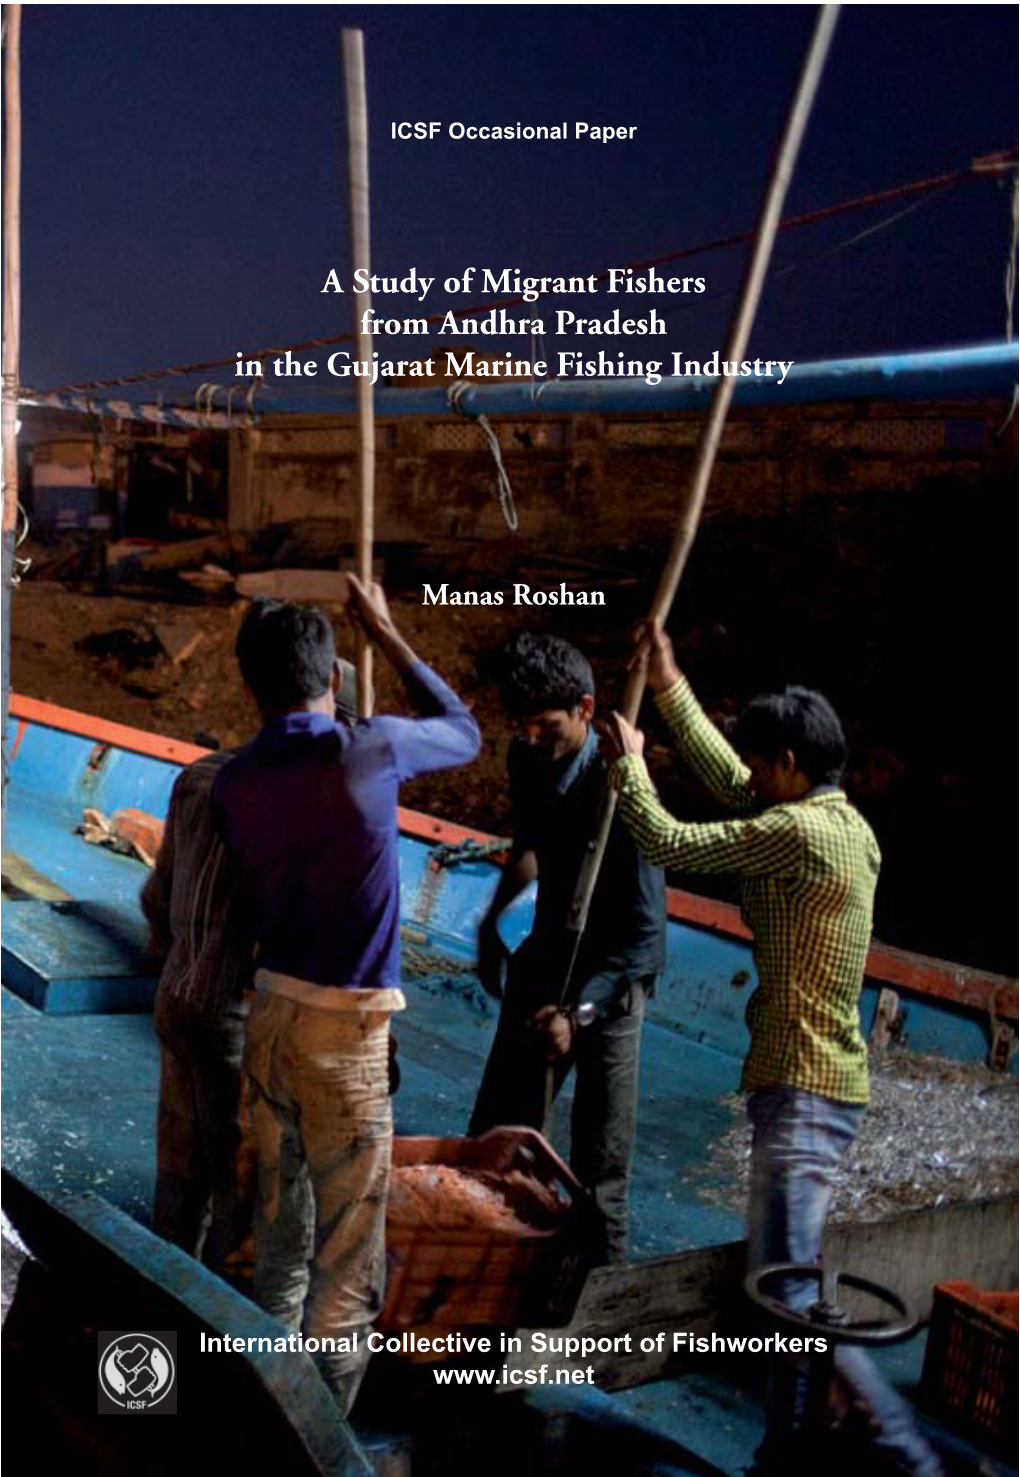 A Study of Migrant Fishers from Andhra Pradesh in the Gujarat Marine Fishing Industry